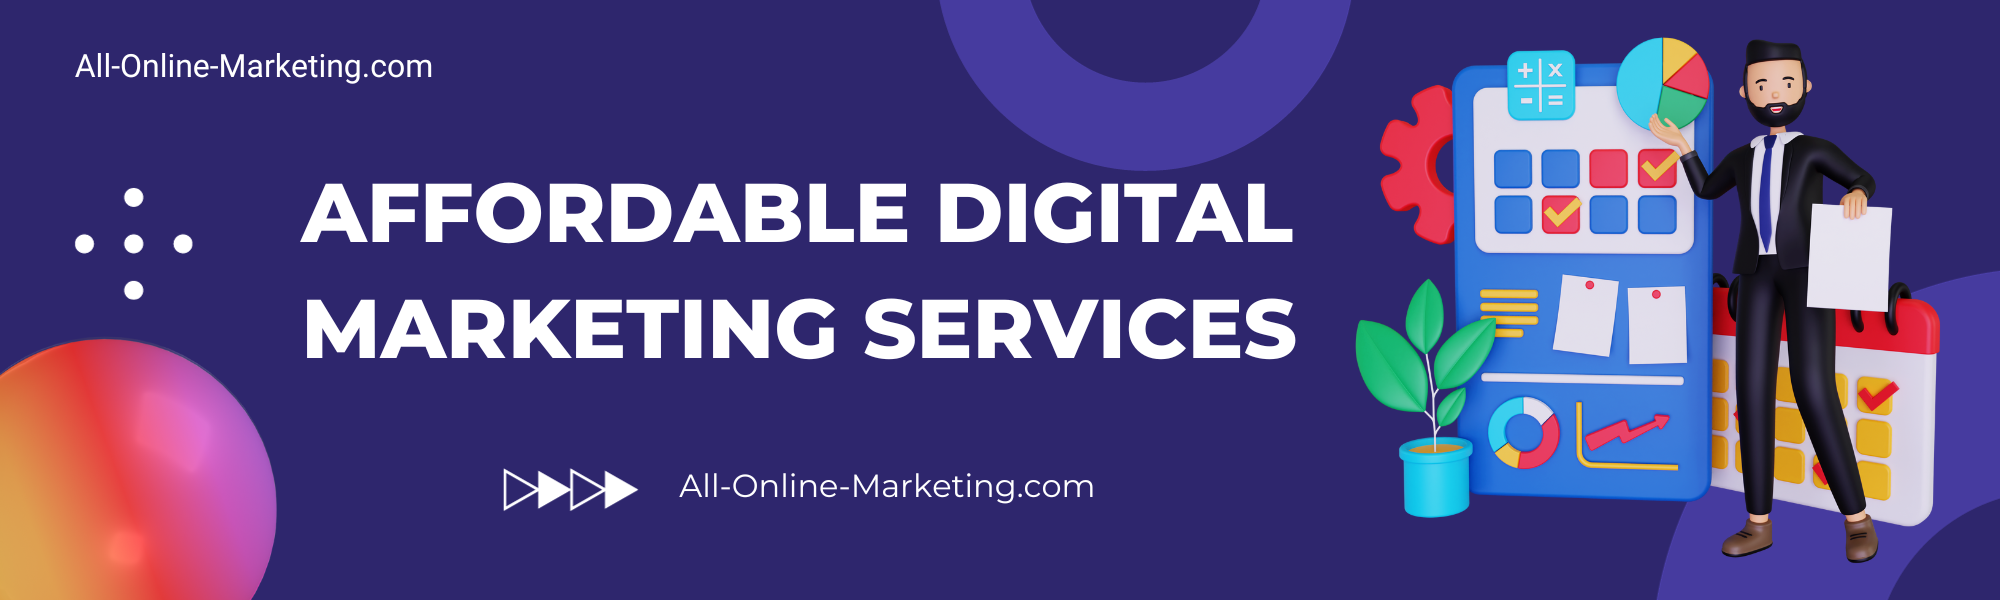 Affordable Digital Marketing Services : 🔥 Low Cost : 🔥 Amazing Price : Competitive Pricing to Generate Sales Leads for Your Business. https://all-online-marketing.com/